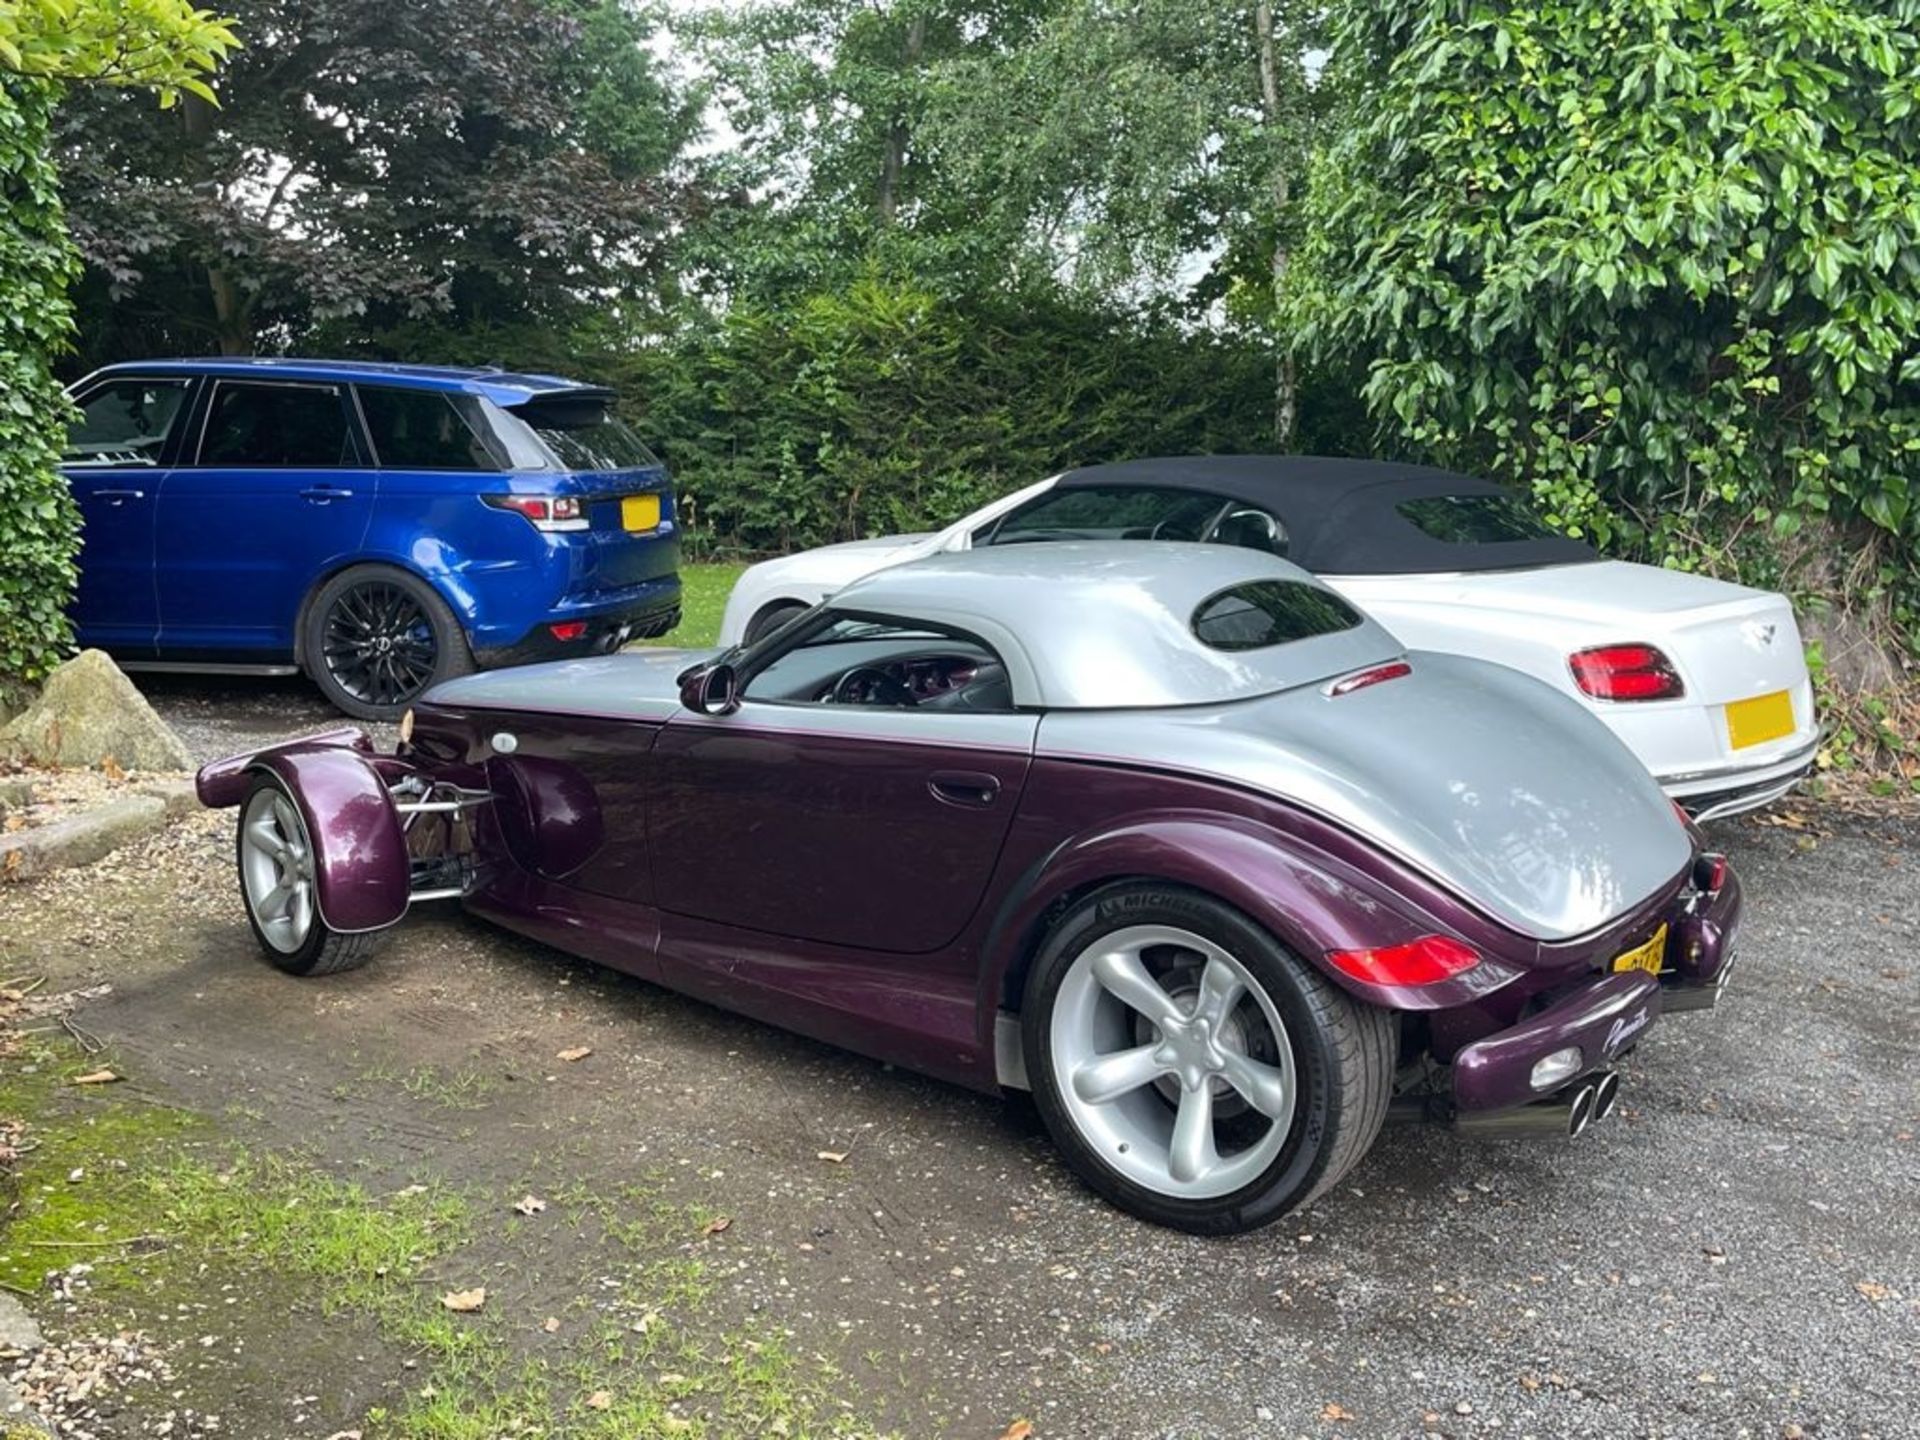 1998 CHRYSLER PLYMOUTH PROWLER V6 2 DOOR CONVERTIBLE, 3500cc PETROL ENGINE, AUTO *NO VAT* - Image 21 of 32